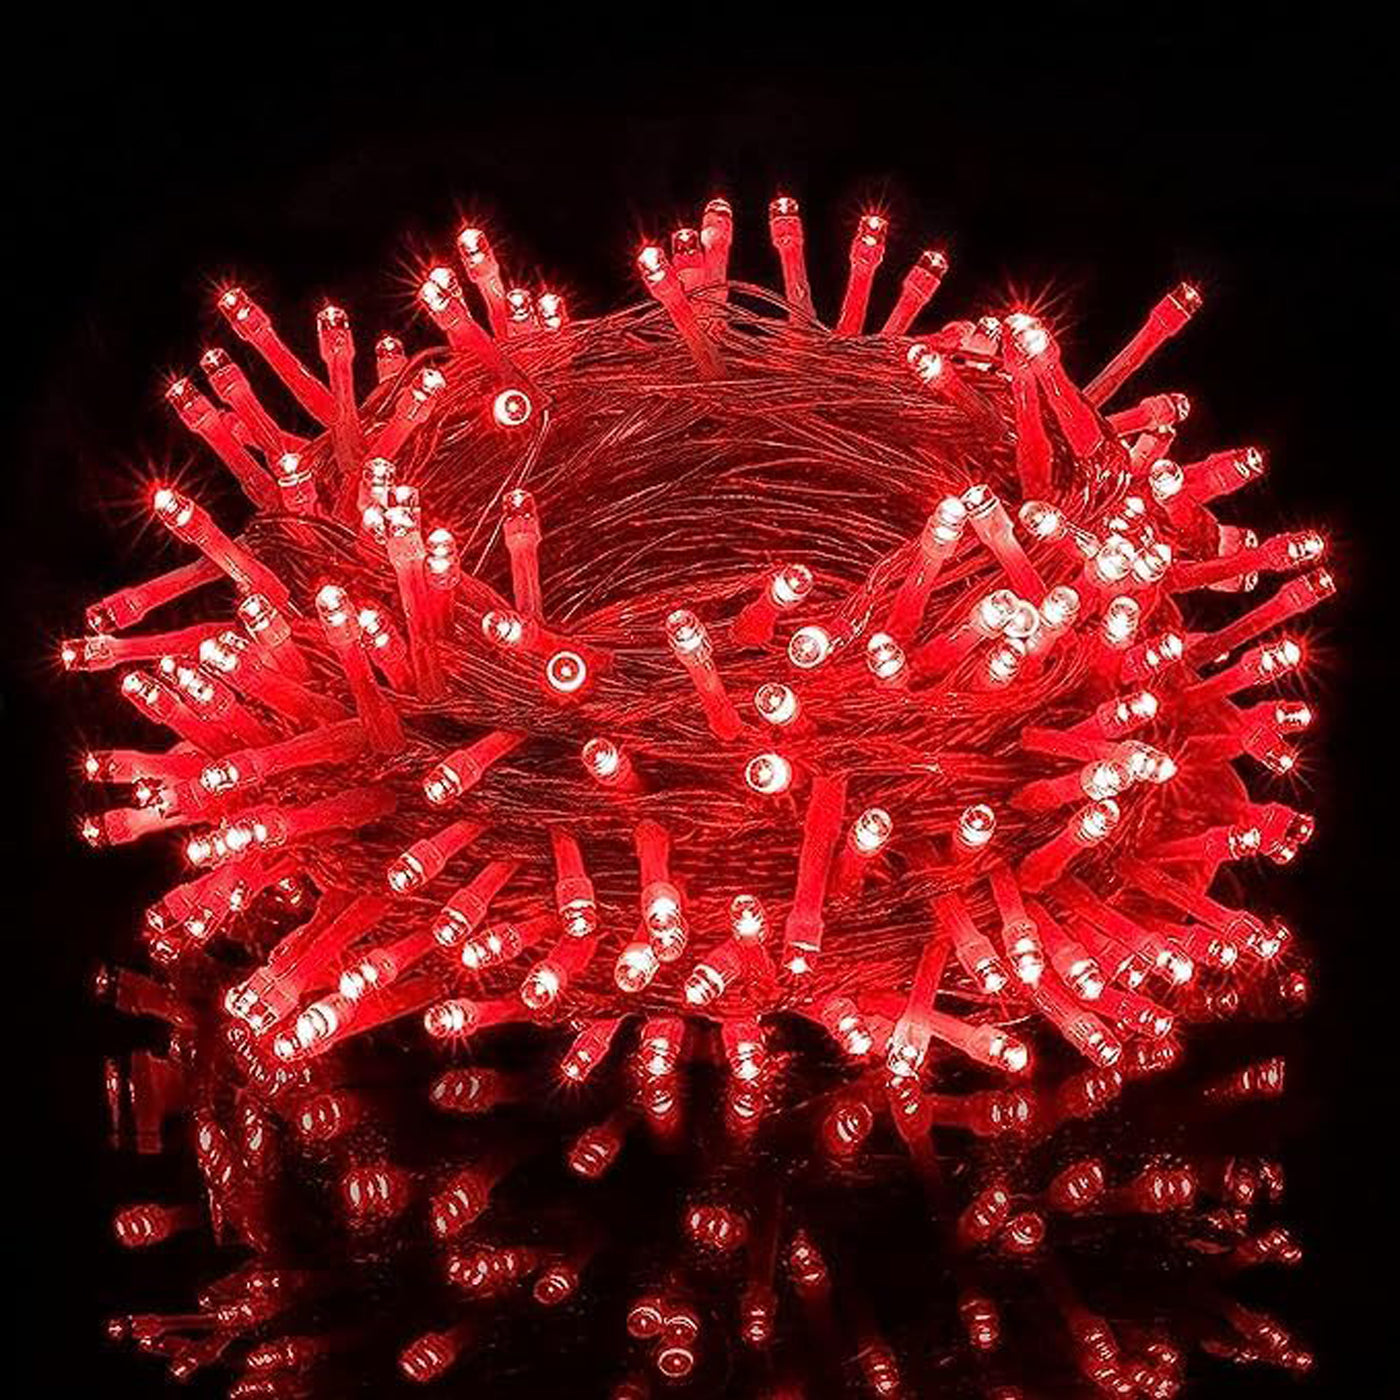 DecorTwist LED String Light for Home and Office Decor | Indoor & Outdoor Decorative Lights | Christmas | Diwali | Wedding | 15 Meter Length (Pack of 4) (Red)